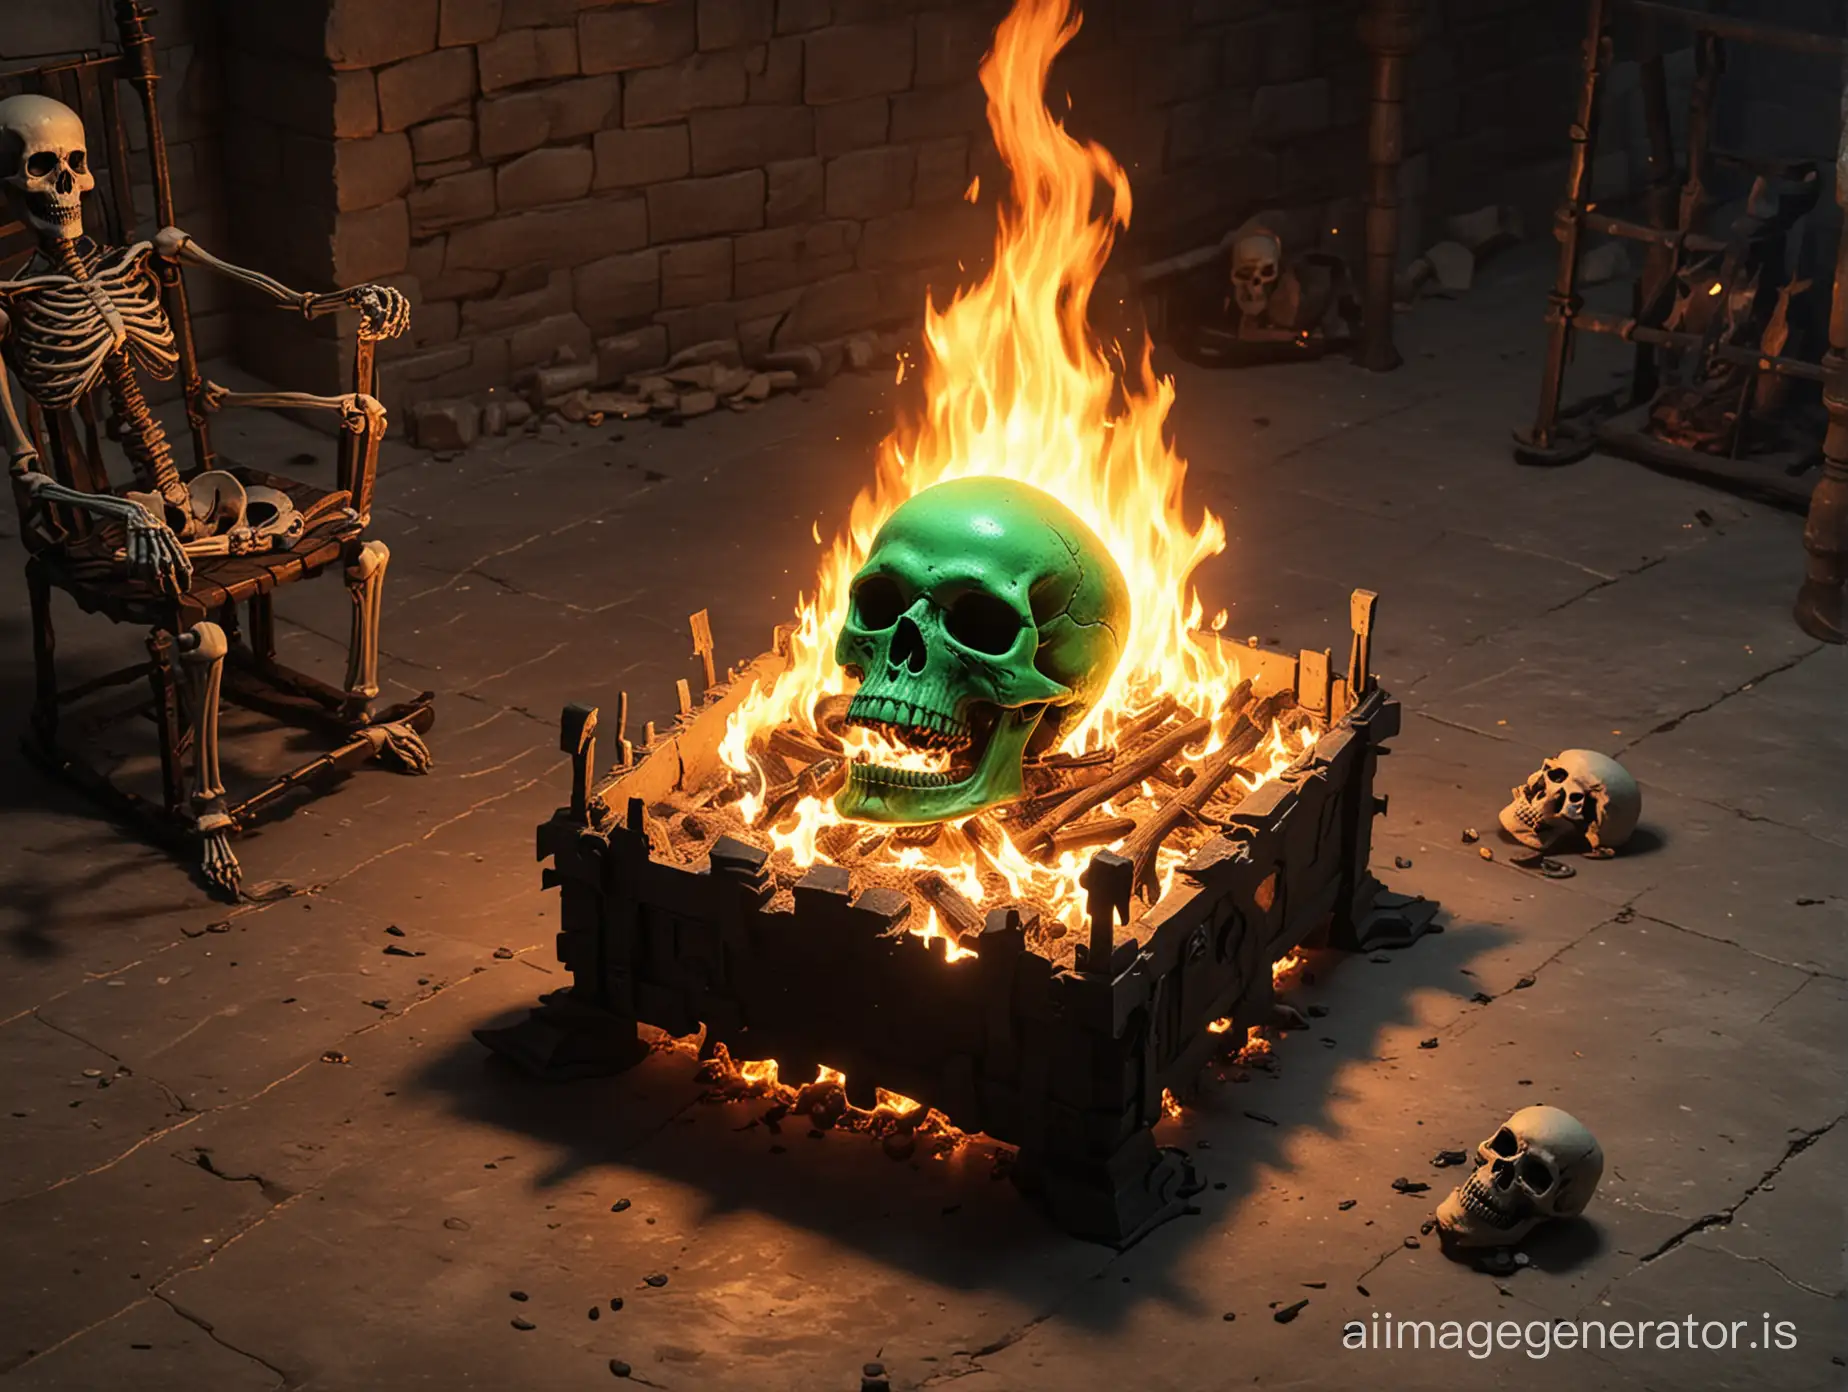 DnD green flaming skull. hovering next to a brazier. dead skeleton bodies on the floor.